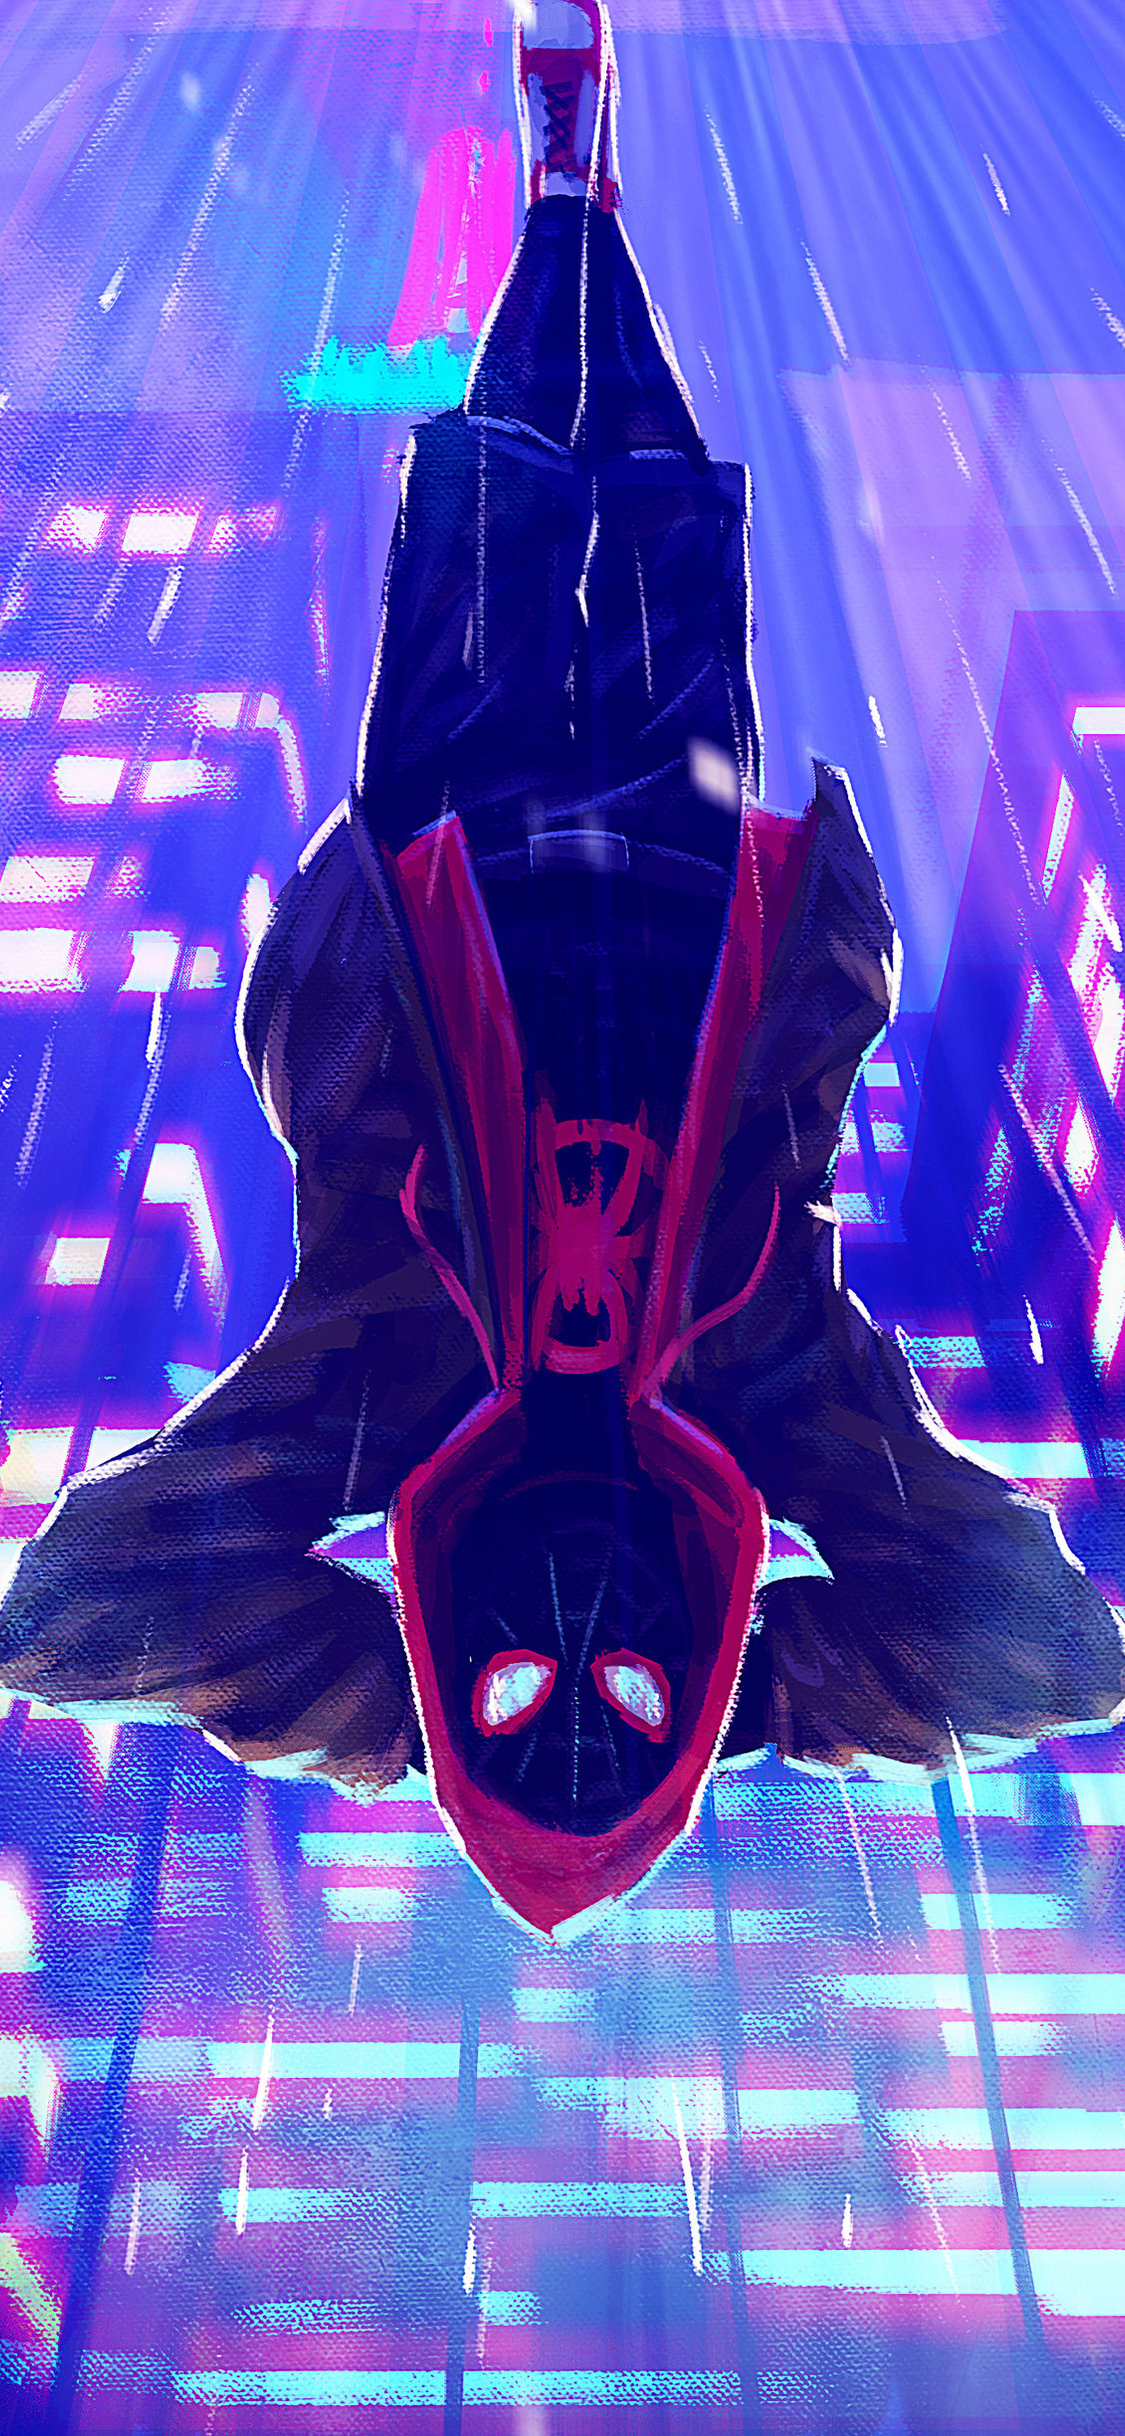 Miles Morales Spiderverse Arts iPhone XS, iPhone iPhone X HD 4k Wallpaper, Image, Background, Photo and Picture